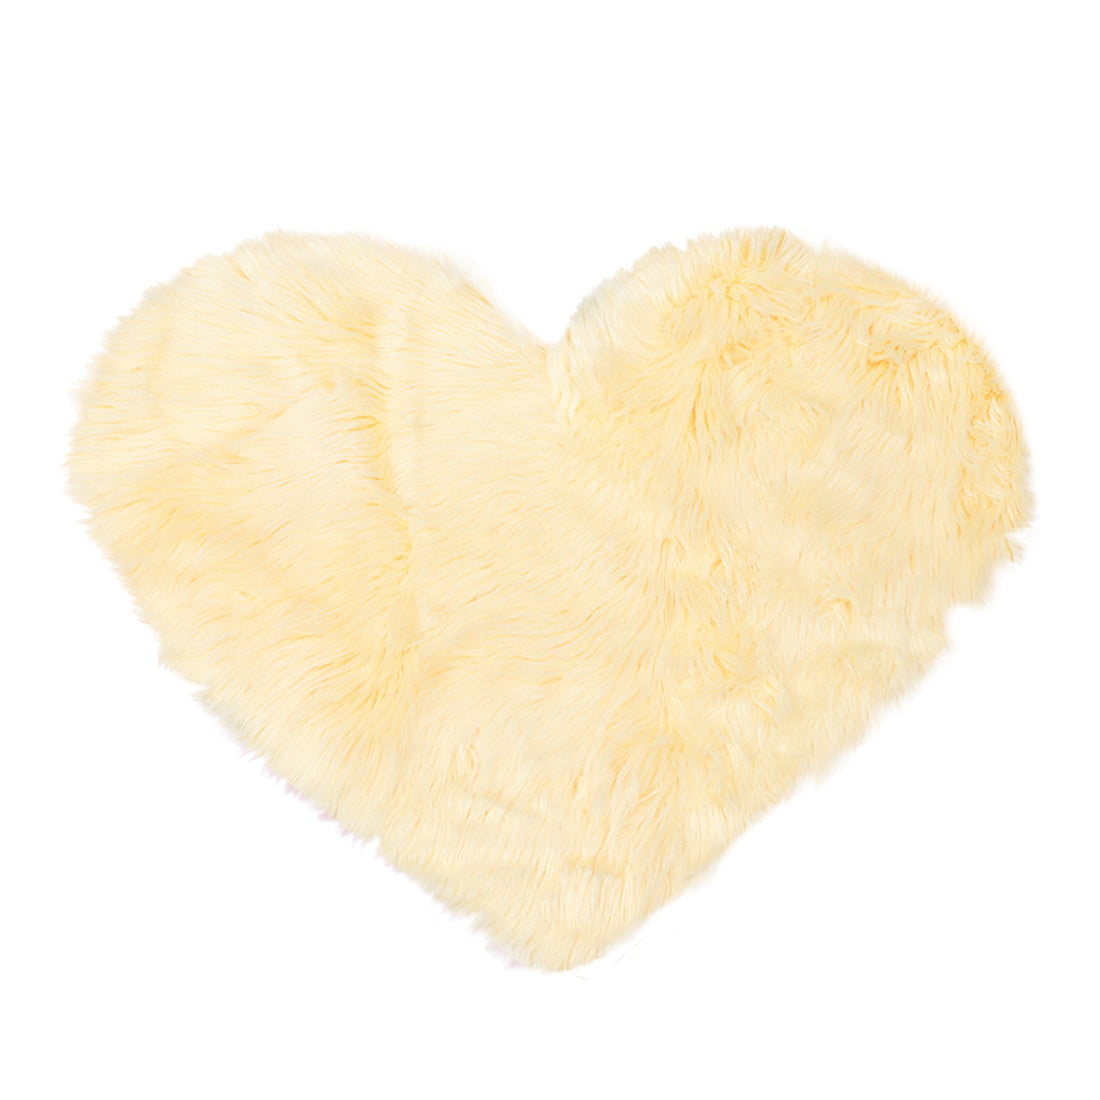 Nursery Perfect for Babys Room playroom Heart White Soft and Silky Machine Washable Faux Sheepskin White Heart Rug 28 x 30 